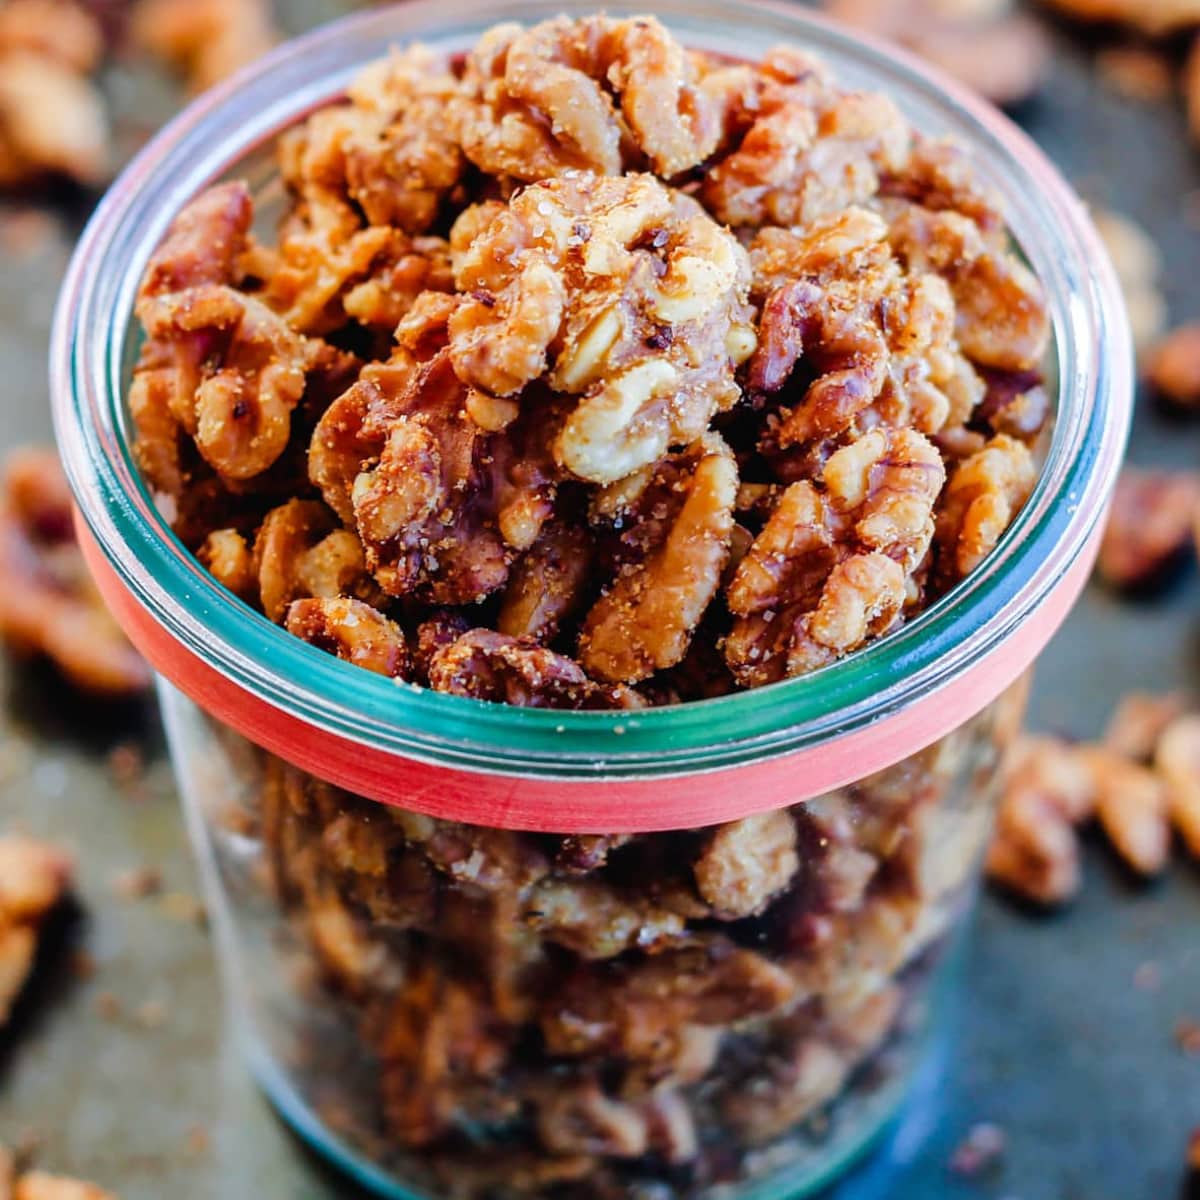 How To Store Walnuts